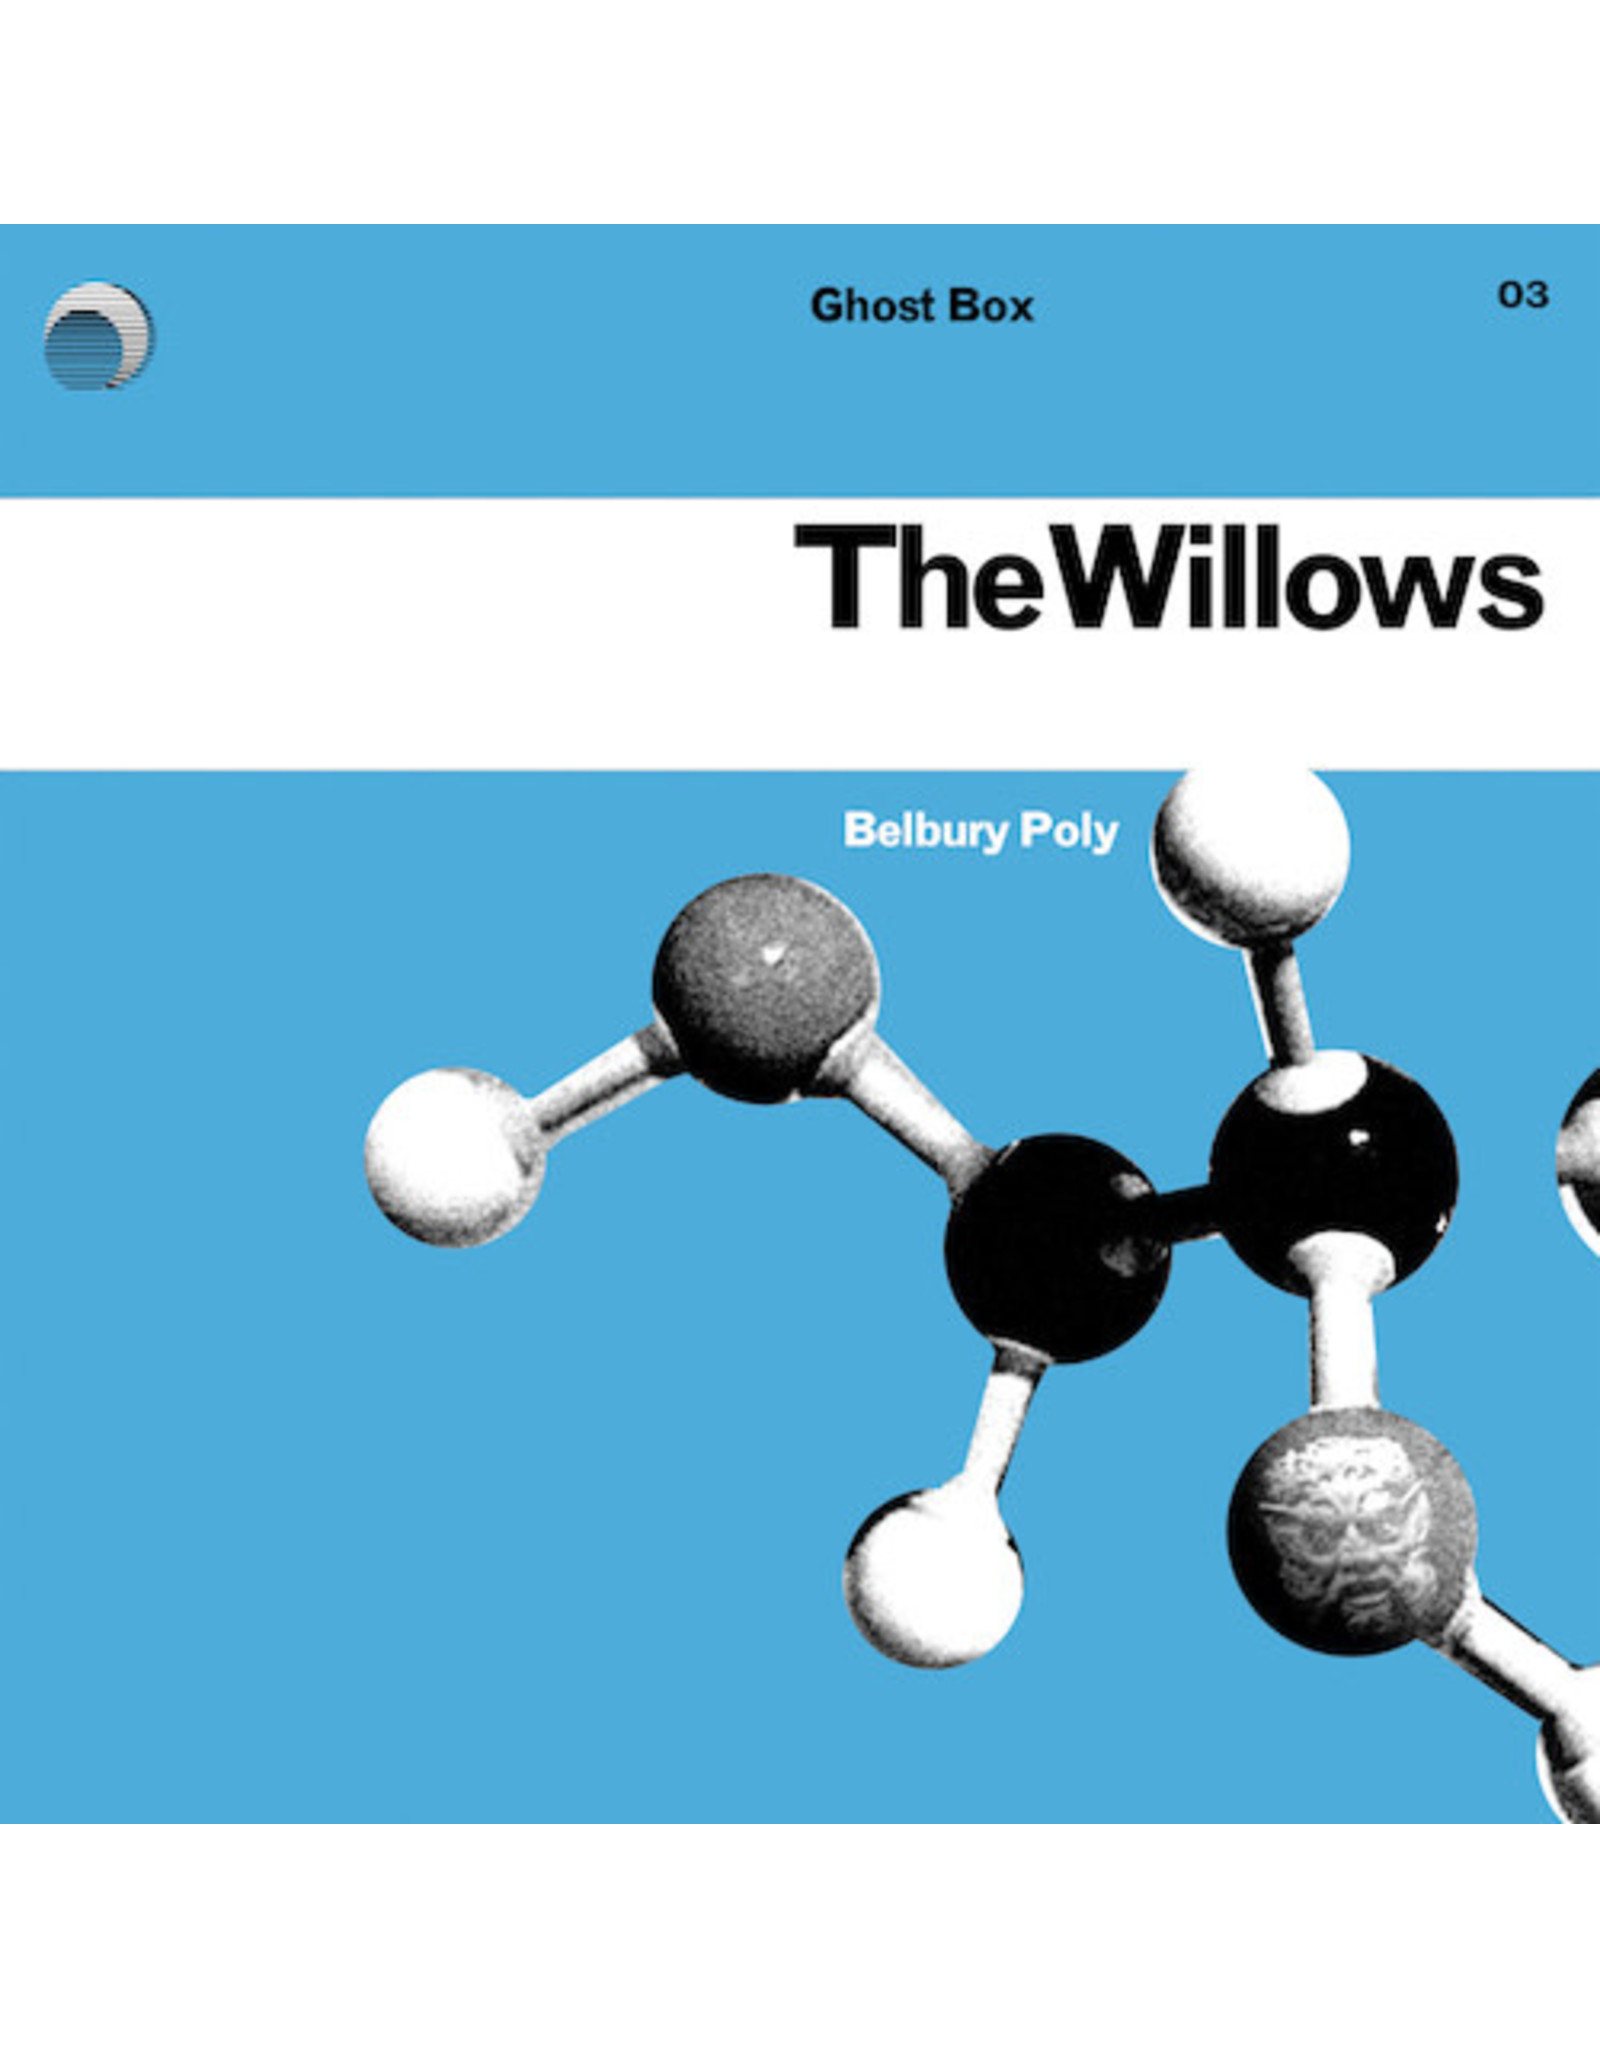 Ghost Box Belbury Poly: The Willows LP